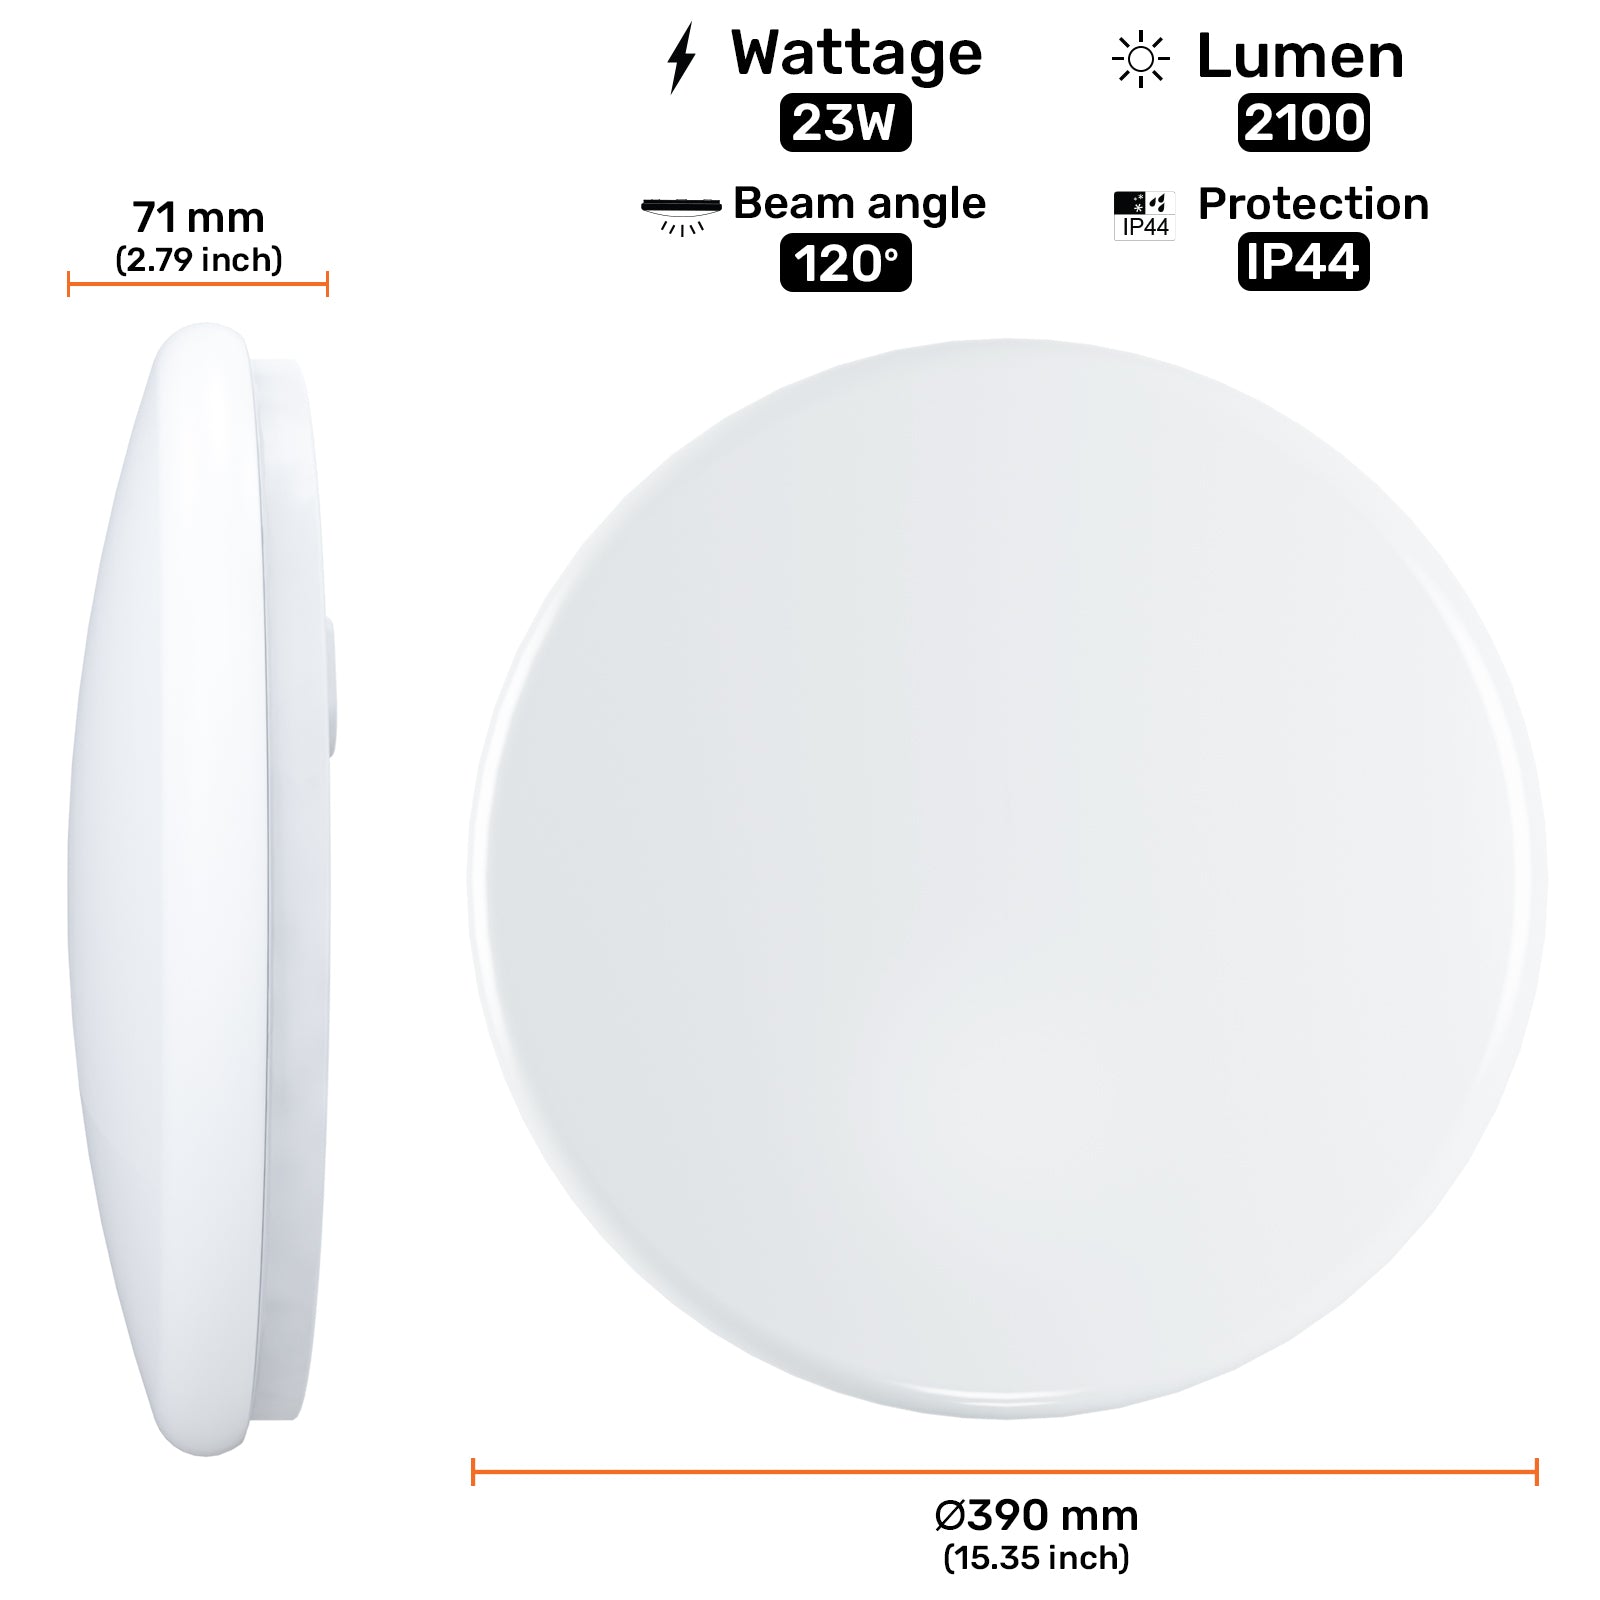 23W, LED Round Ceiling Downlights, 125W Equivalent, IP44, 2100 Lumens, 6500K Day Light, Non-Dimmable Panel Spotlights